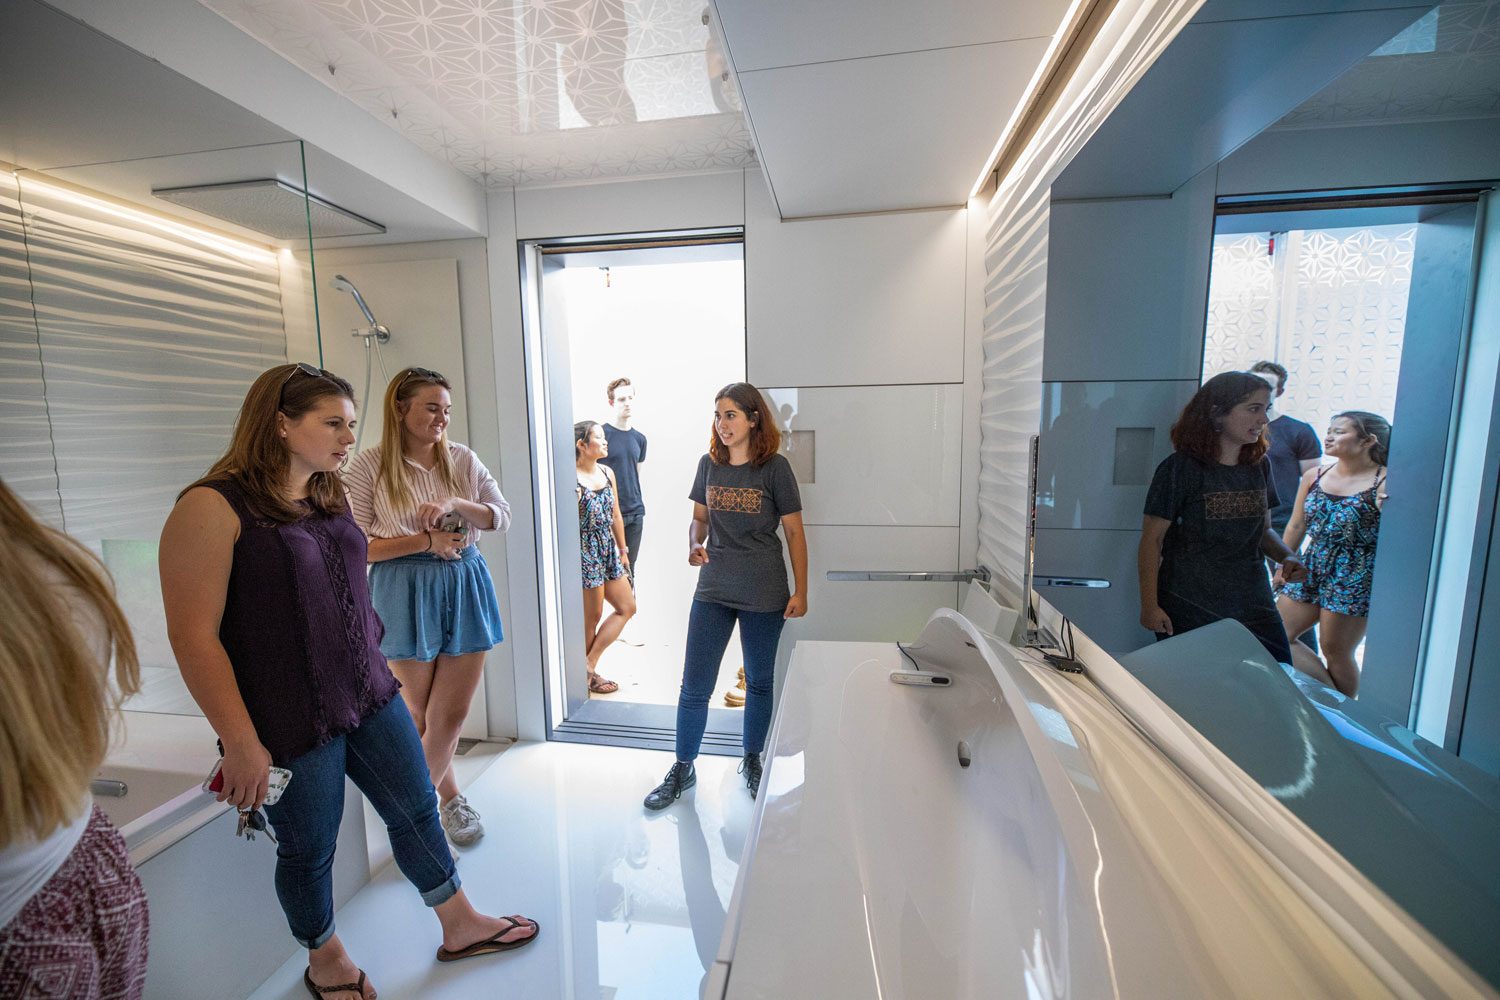 Three women stand inside a futuristic-looking bathroom, complete with a 3D printed sink.